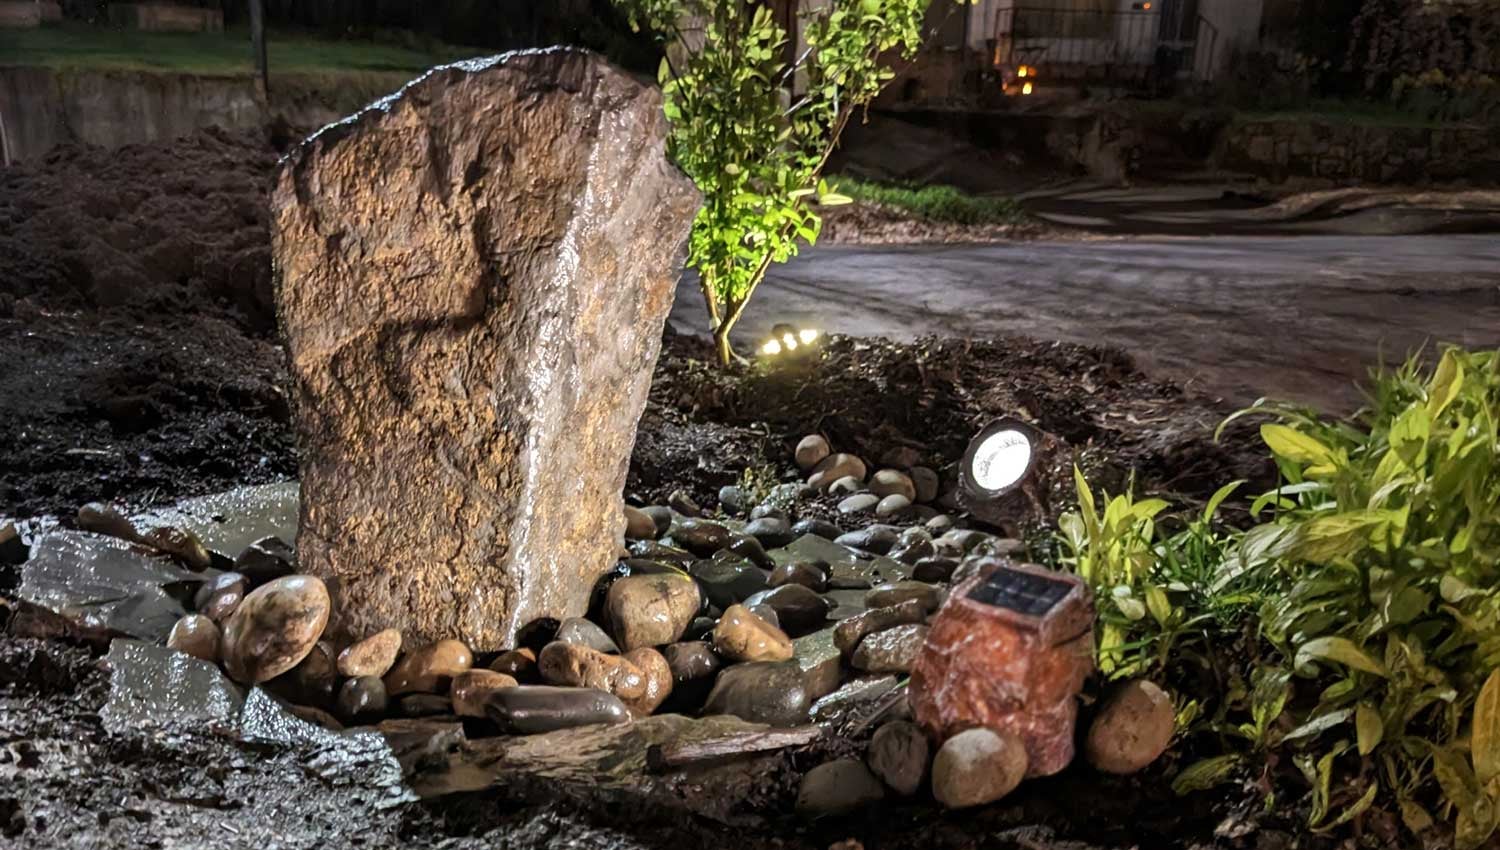 Solar lights disguised as rocks illuminate this feature at night, but blend in well.  (Photo: Amanda Blum)